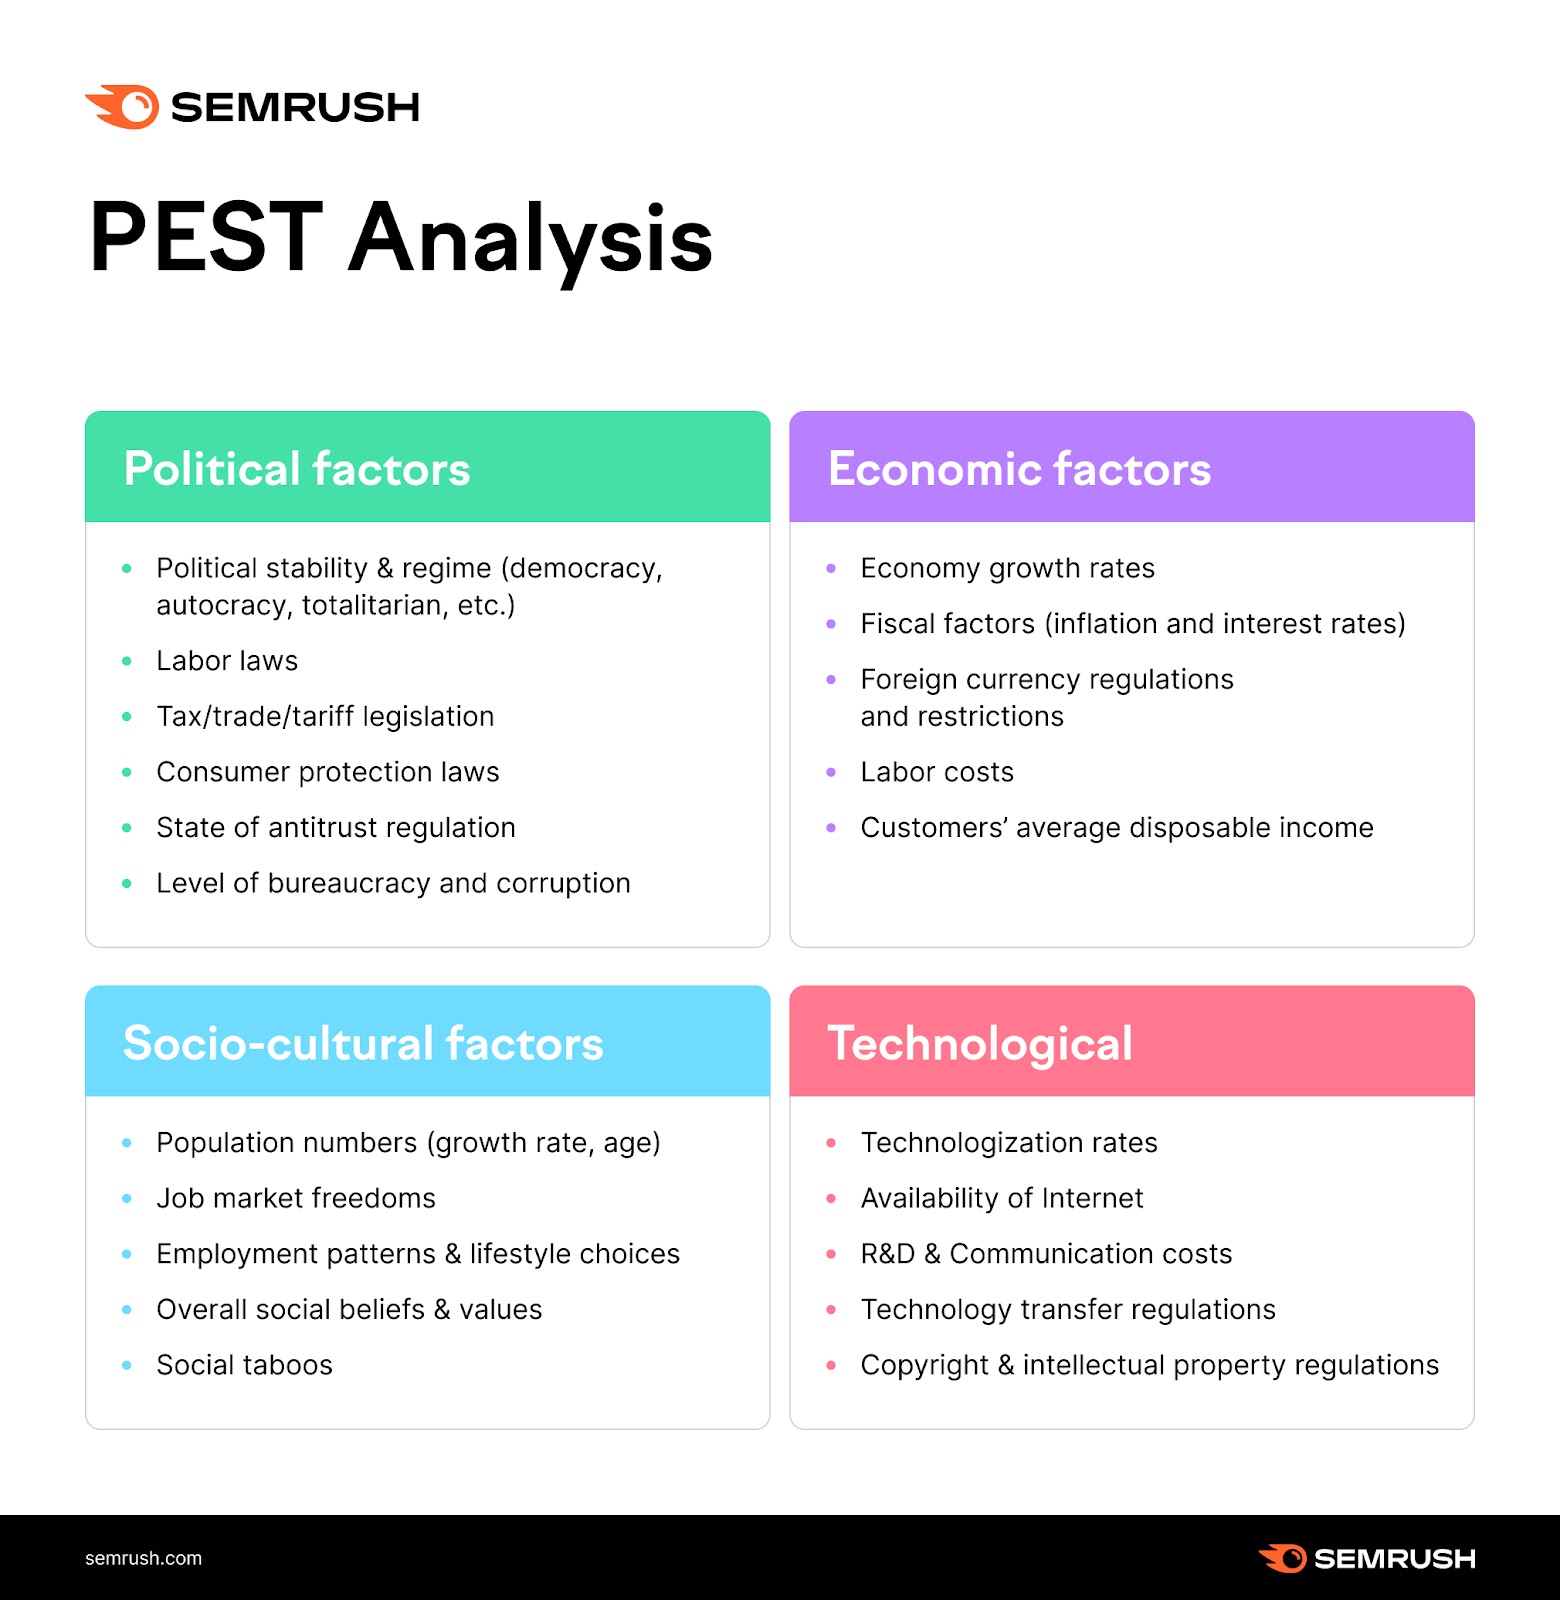 PEST analysis overview